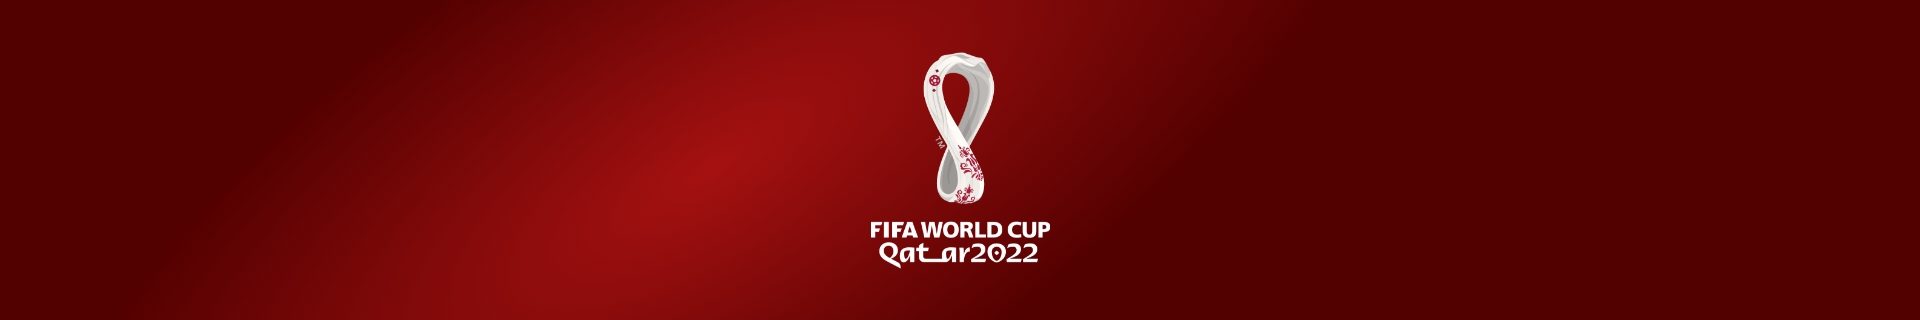 World Cup 2022 Banner